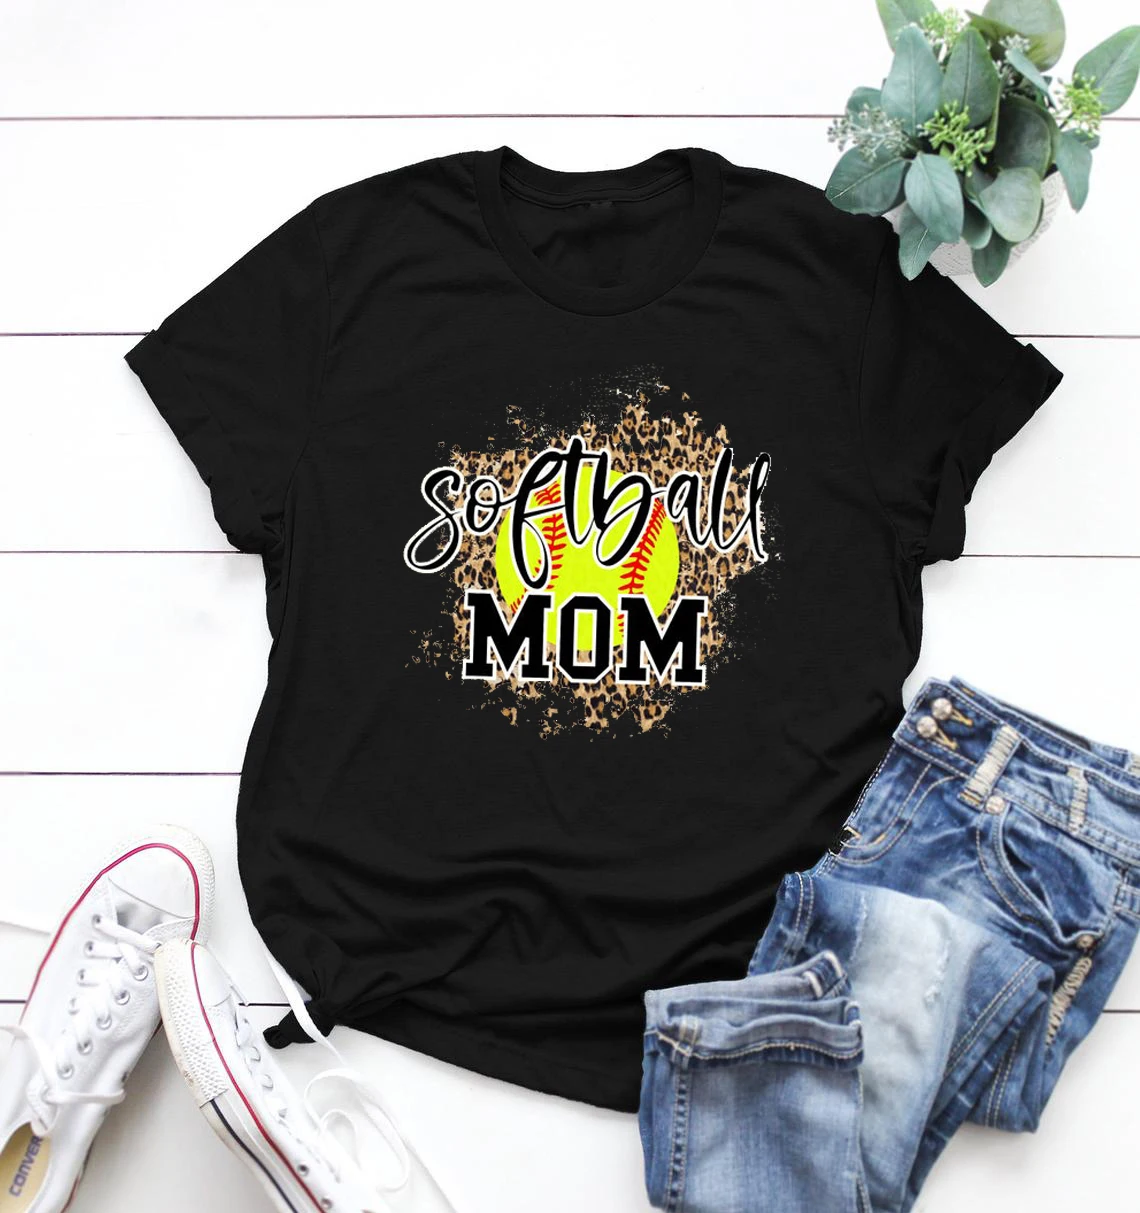 

Softball Mom T-shirt Gift To Mother Female Sport Graphic Tee Mother's Day Women Fashion Tops Cheetah Ladys Holiday Shirt